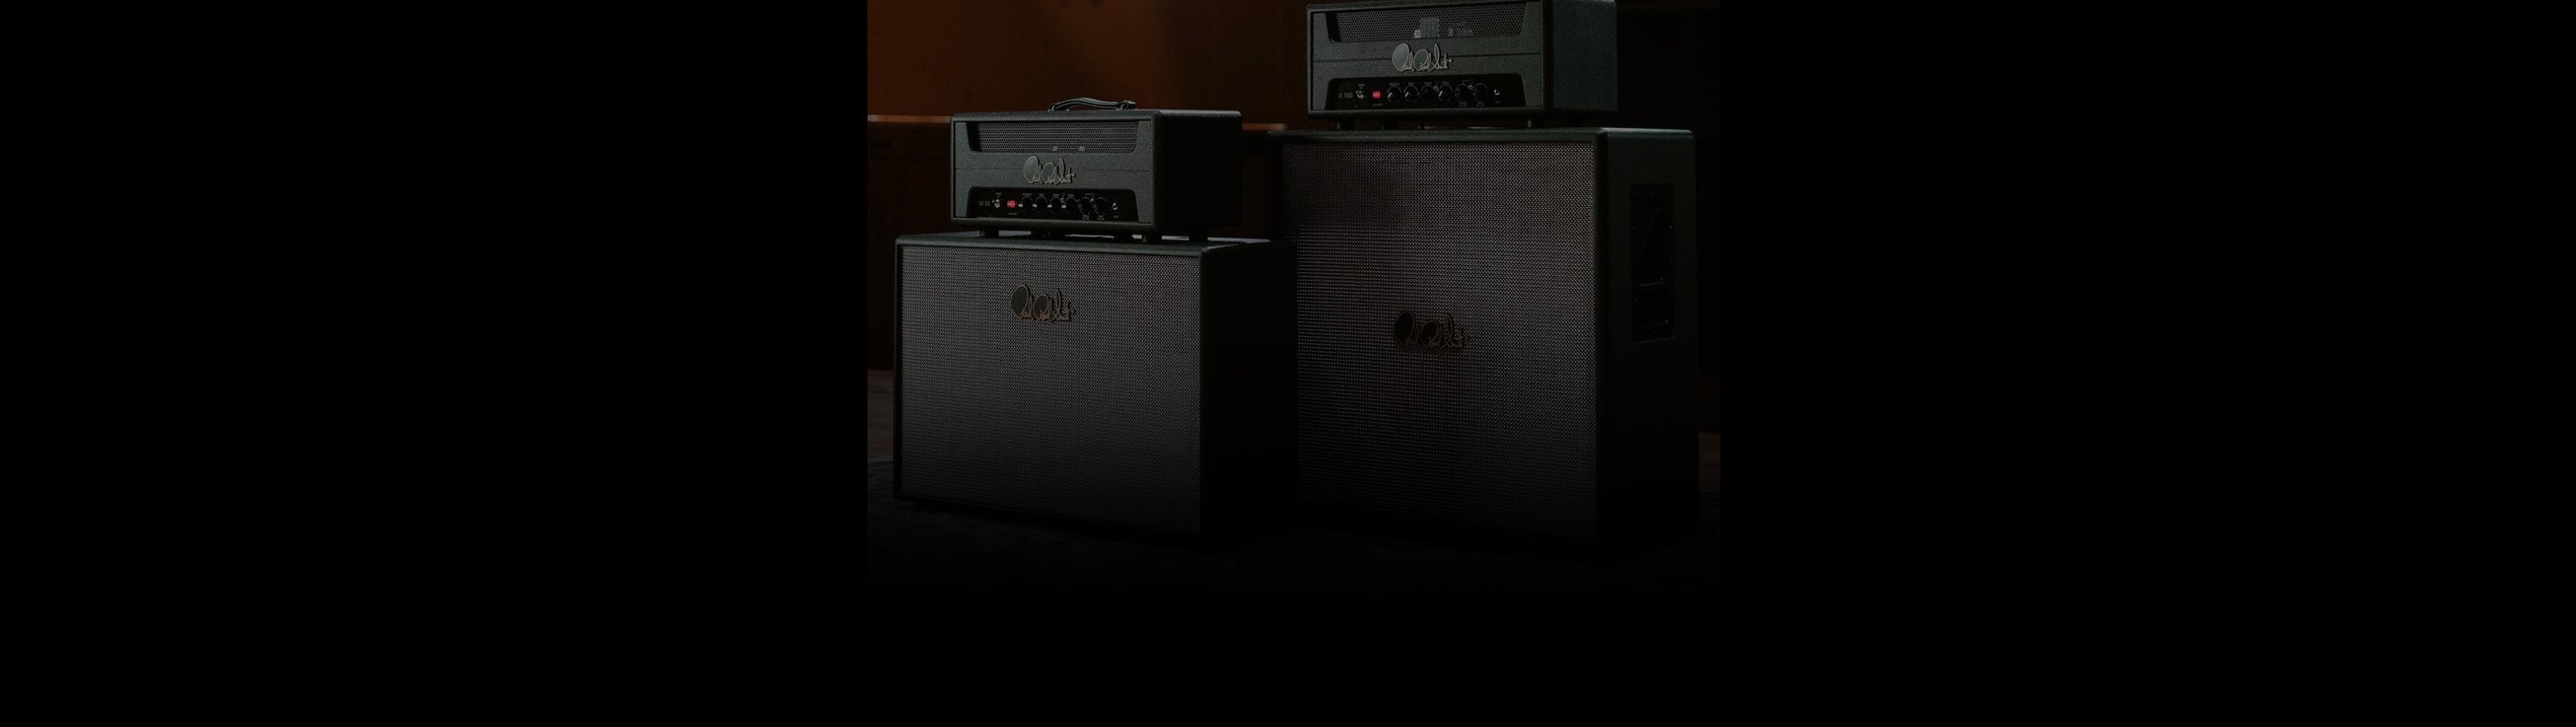 PRS HDRX Amplifiers